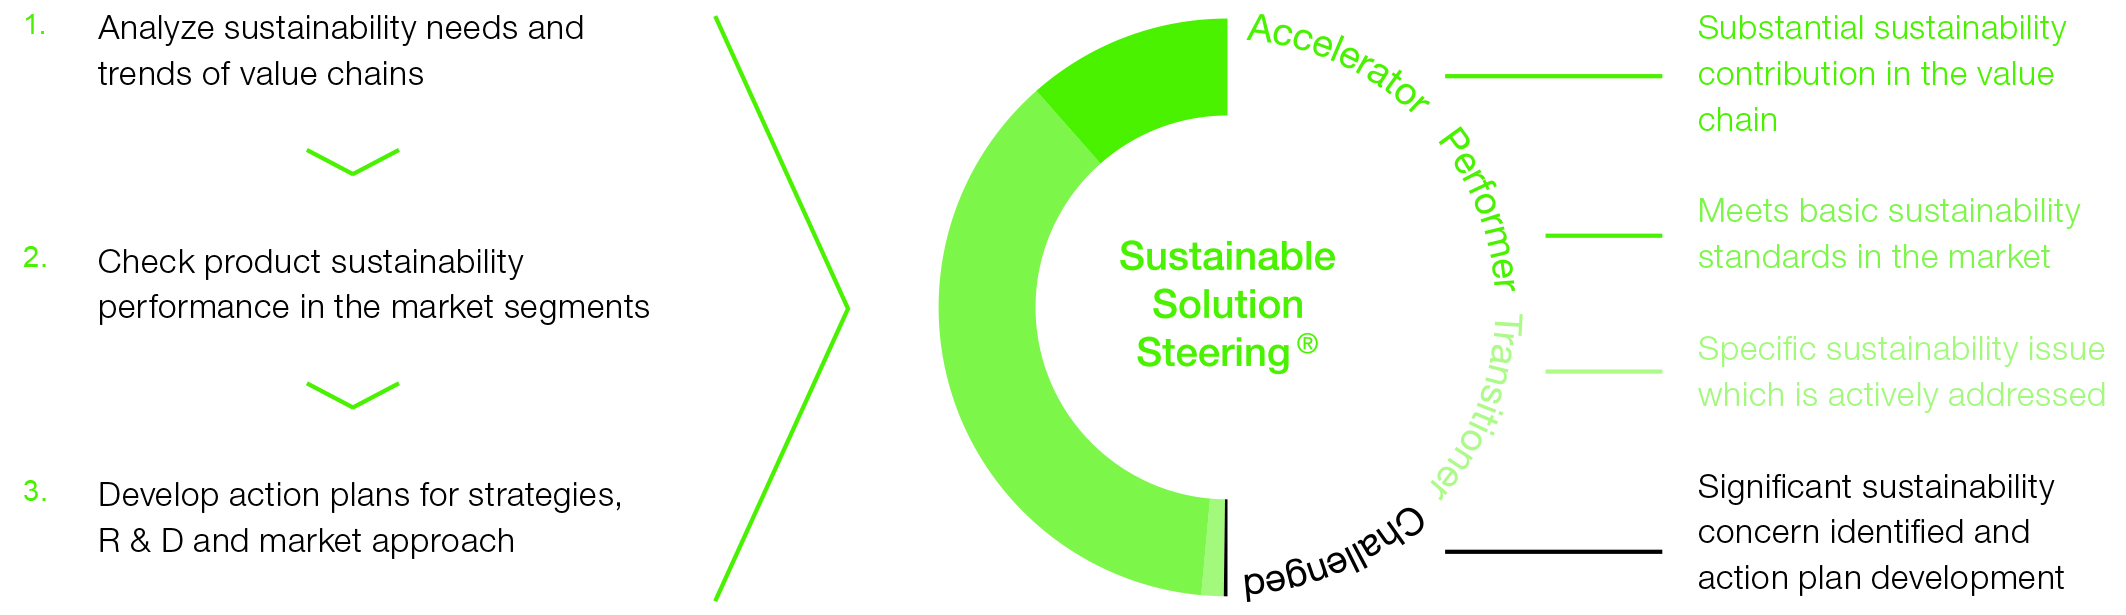 P170 Sustainable solutions steering